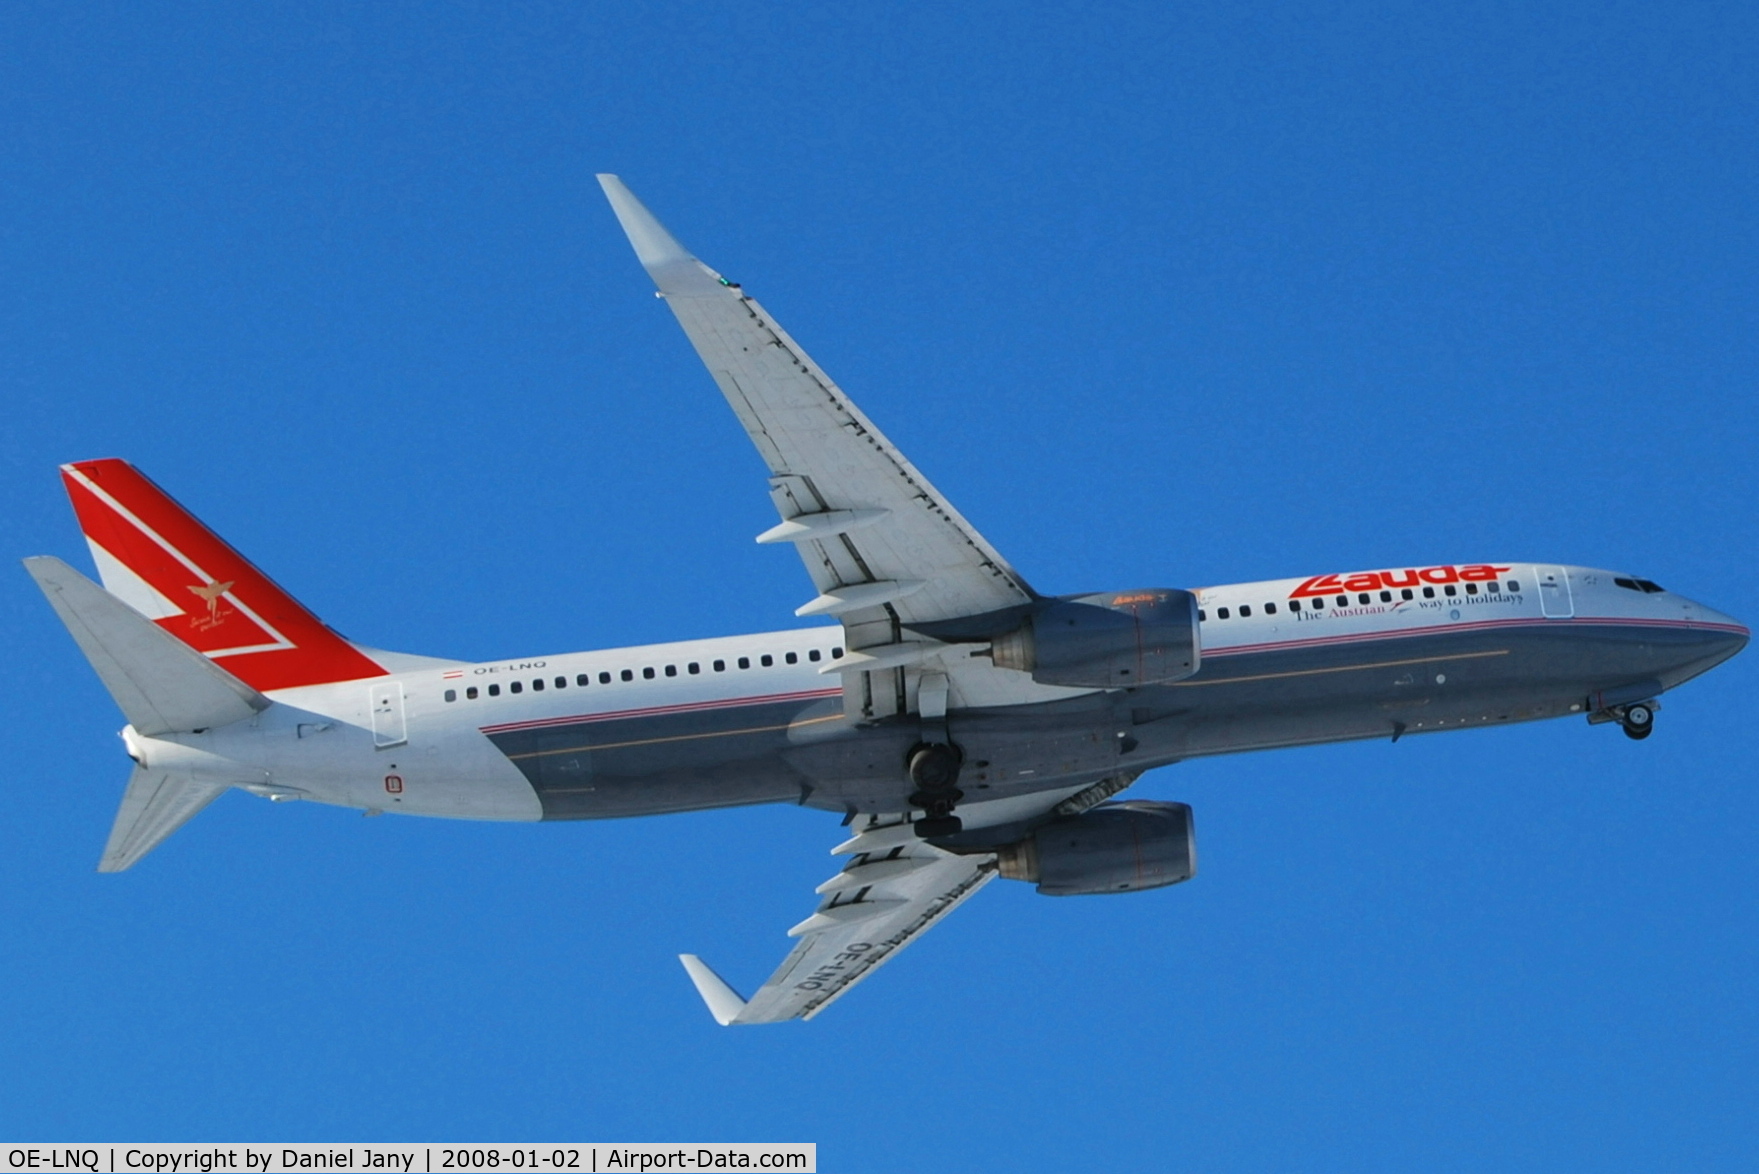 OE-LNQ, 2003 Boeing 737-8Z9 C/N 30421, After take off